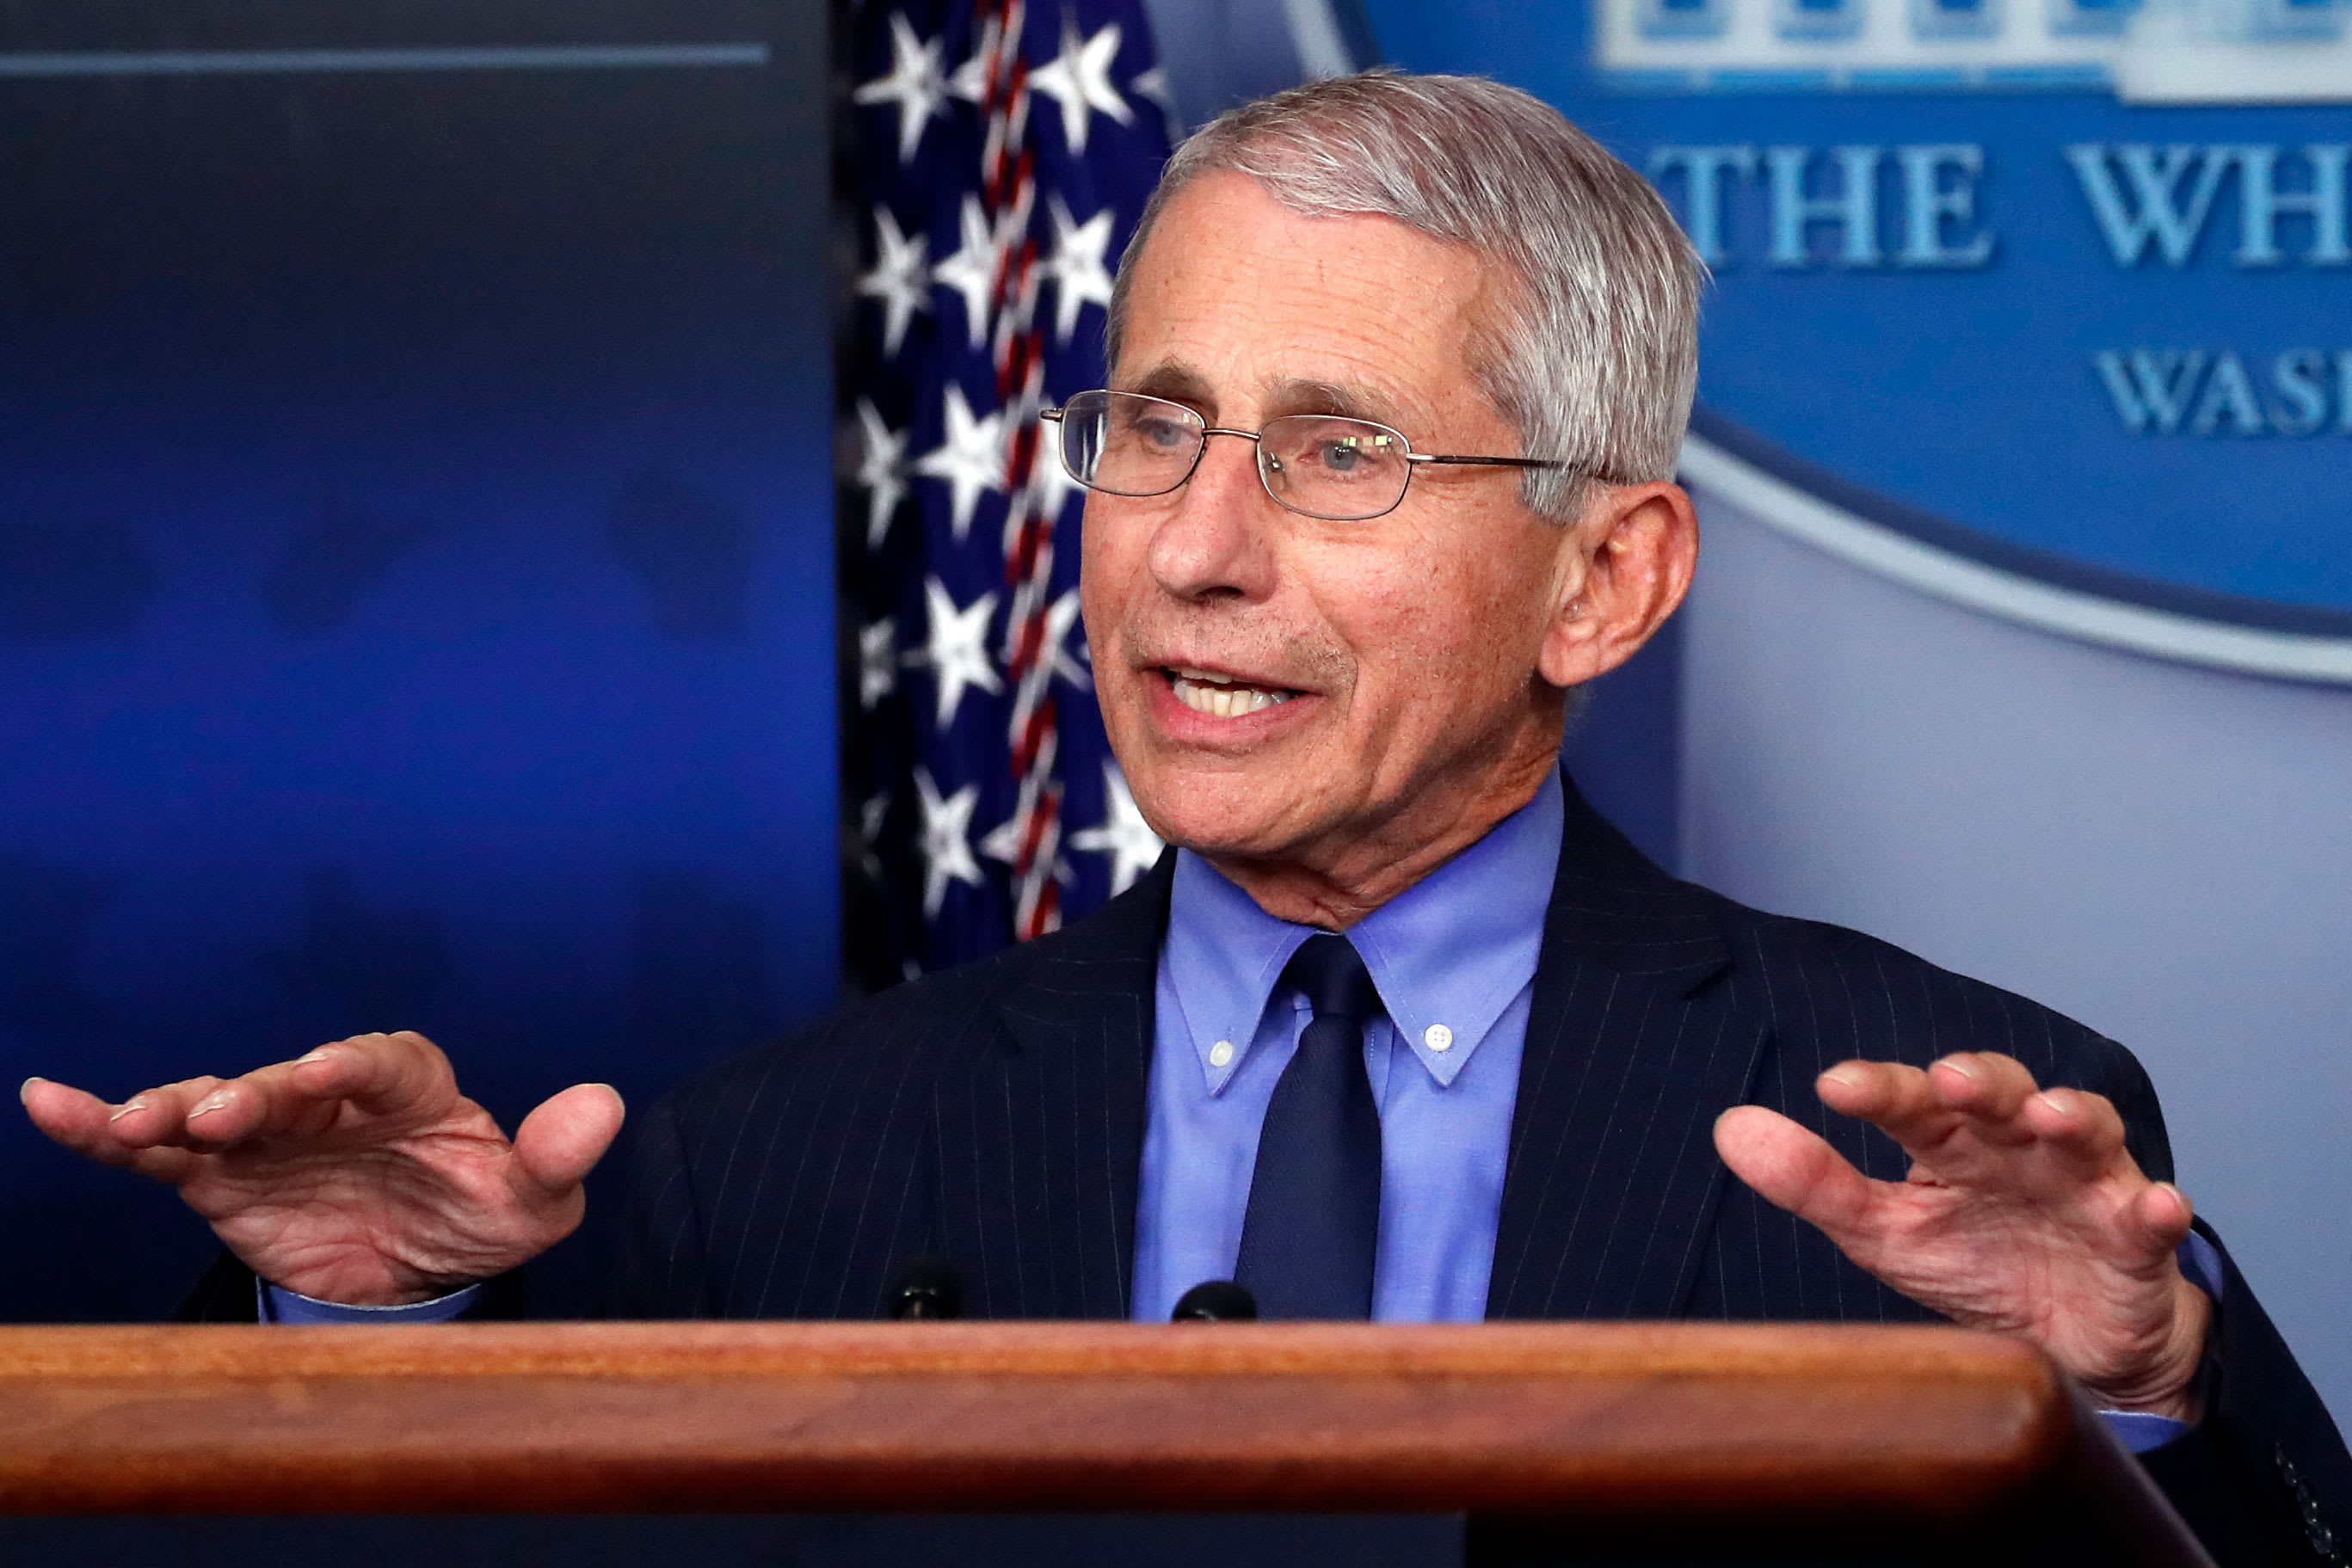 Dr. Anthony Fauci says Americans who don't wear masks may 'propagate the further spread of infection'